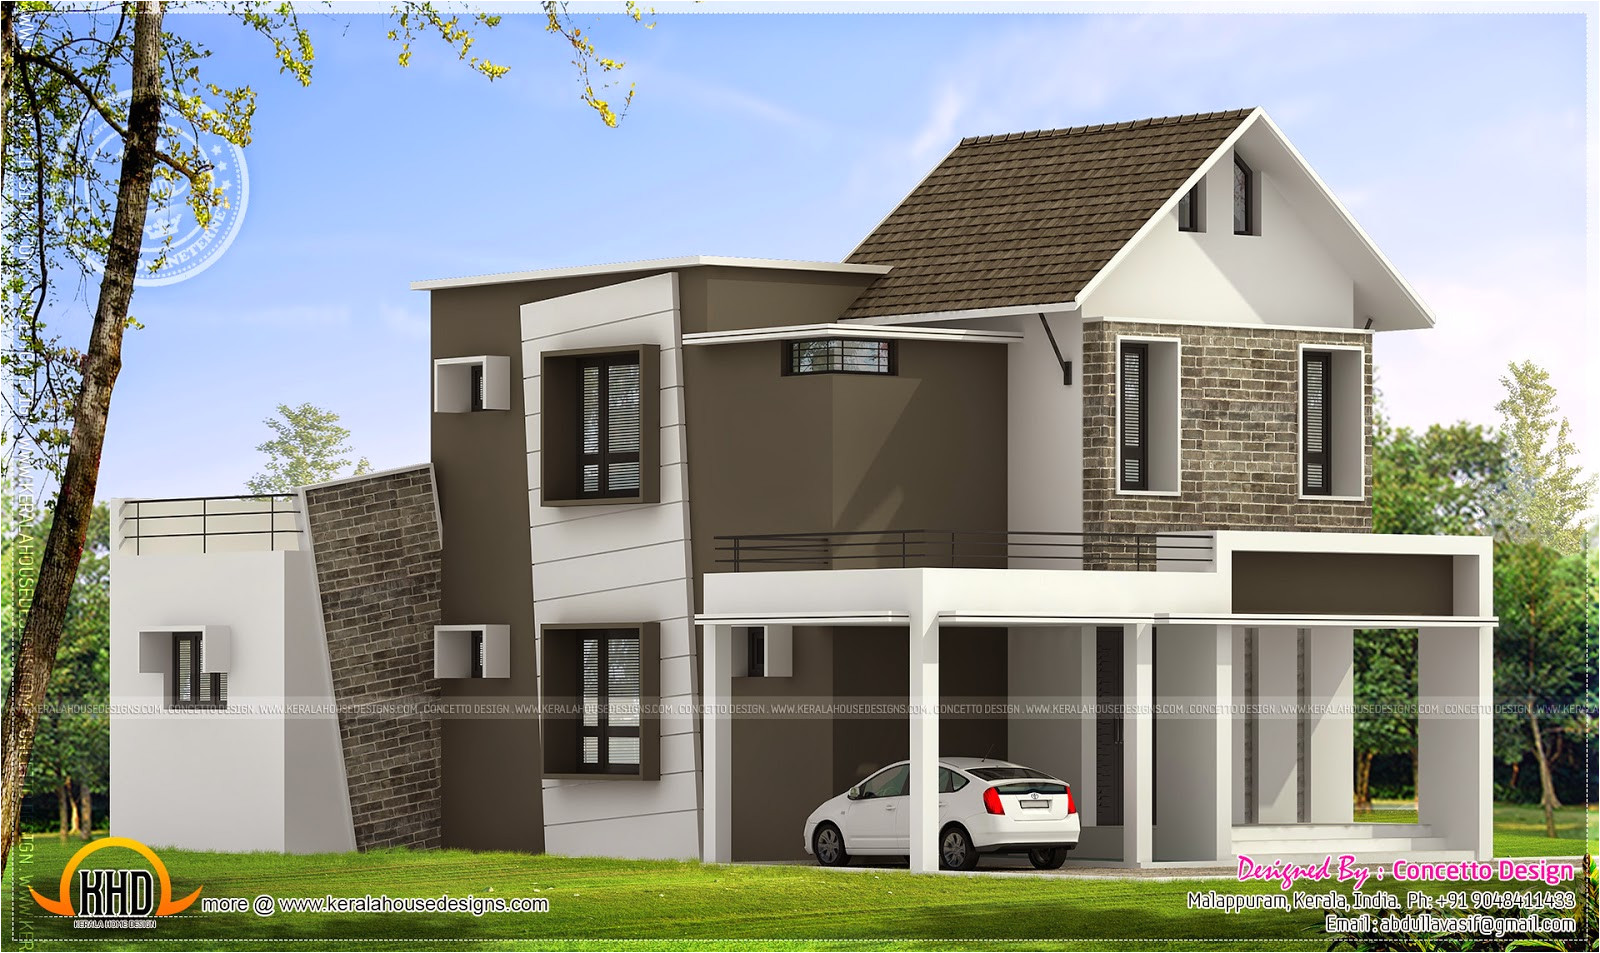 Home Plan and Design May 2014 Kerala Home Design and Floor Plans